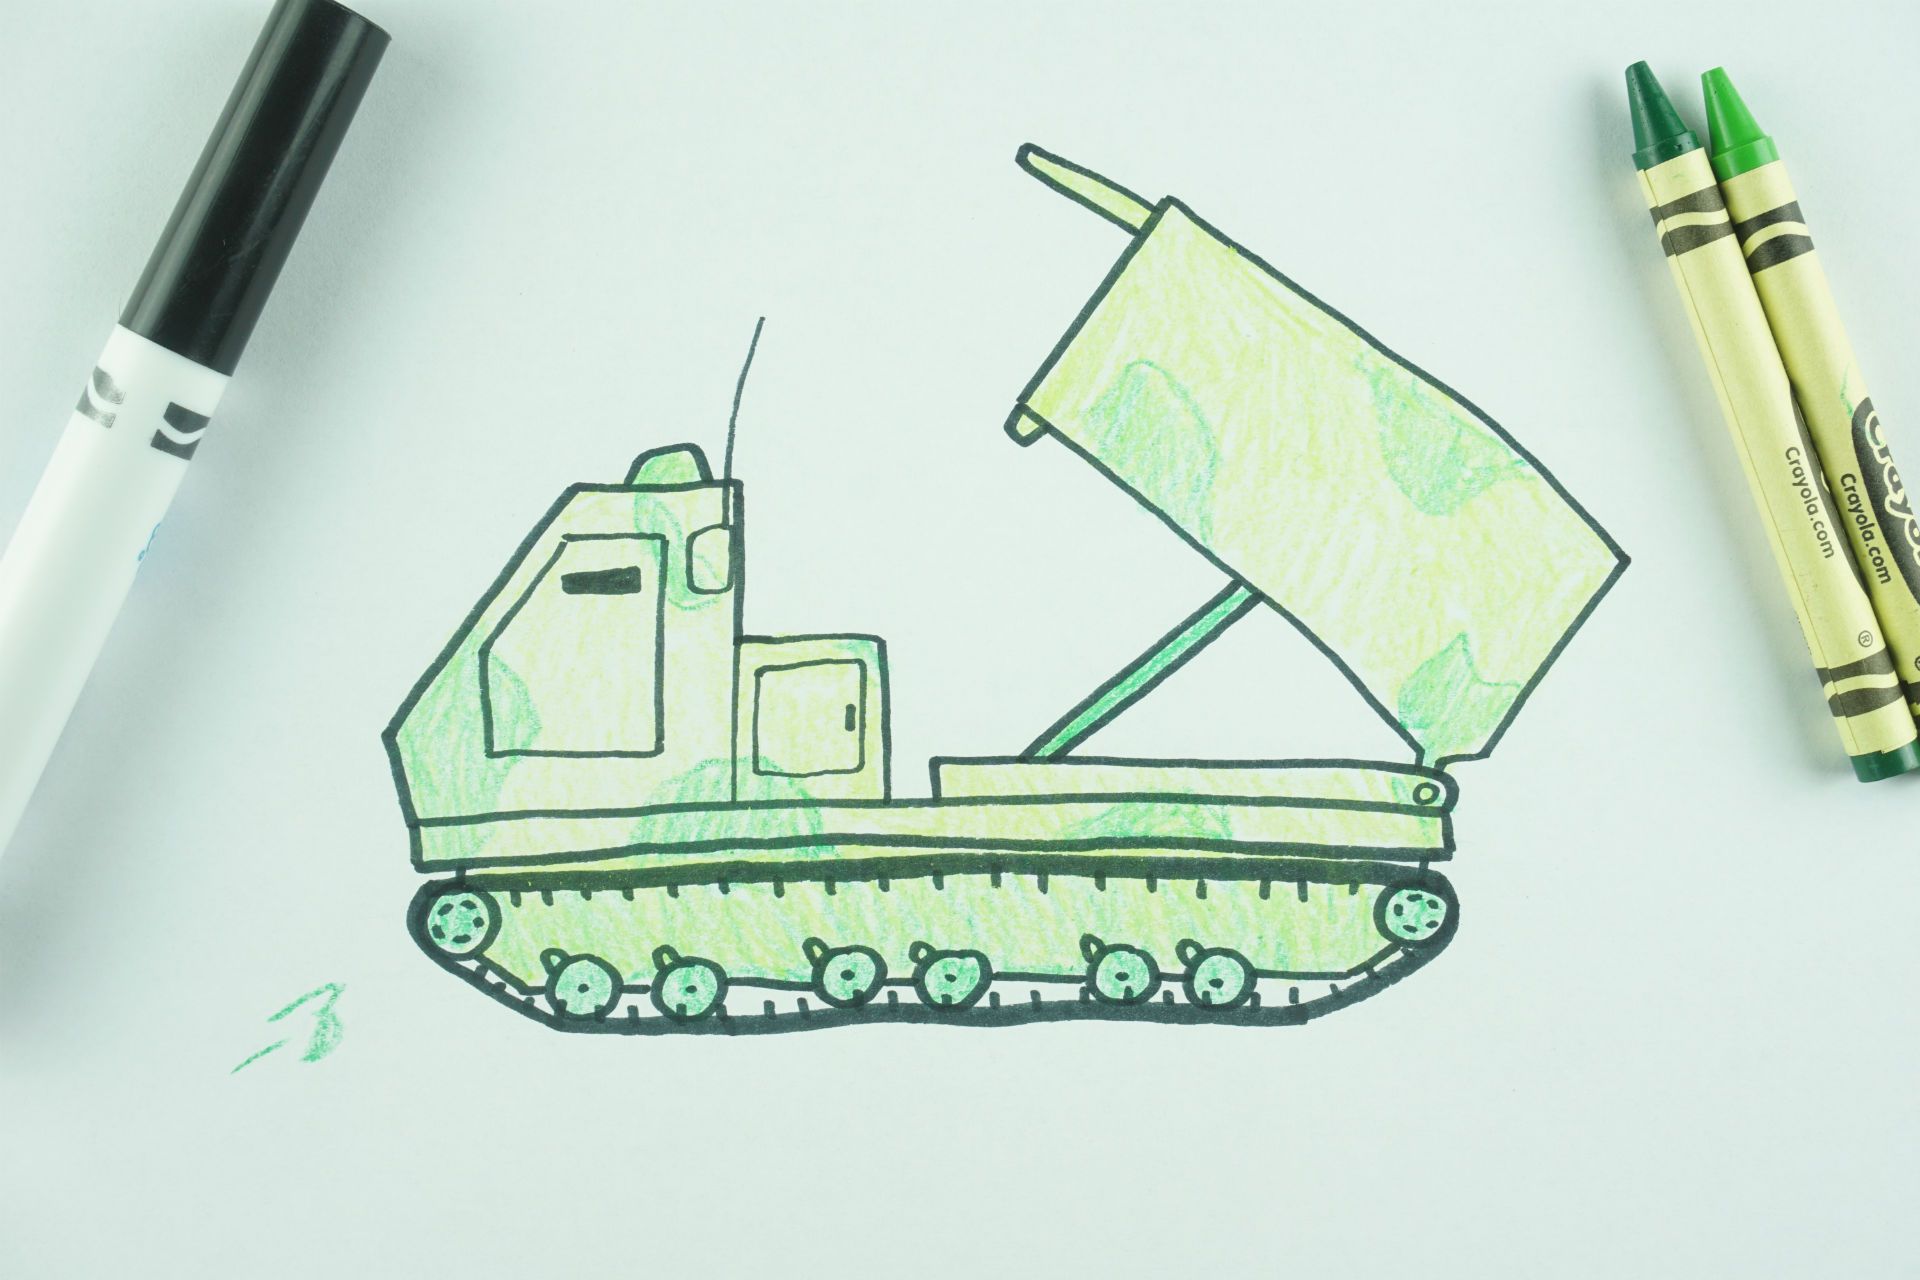 ✒️ How to Draw: Rocket Artillery